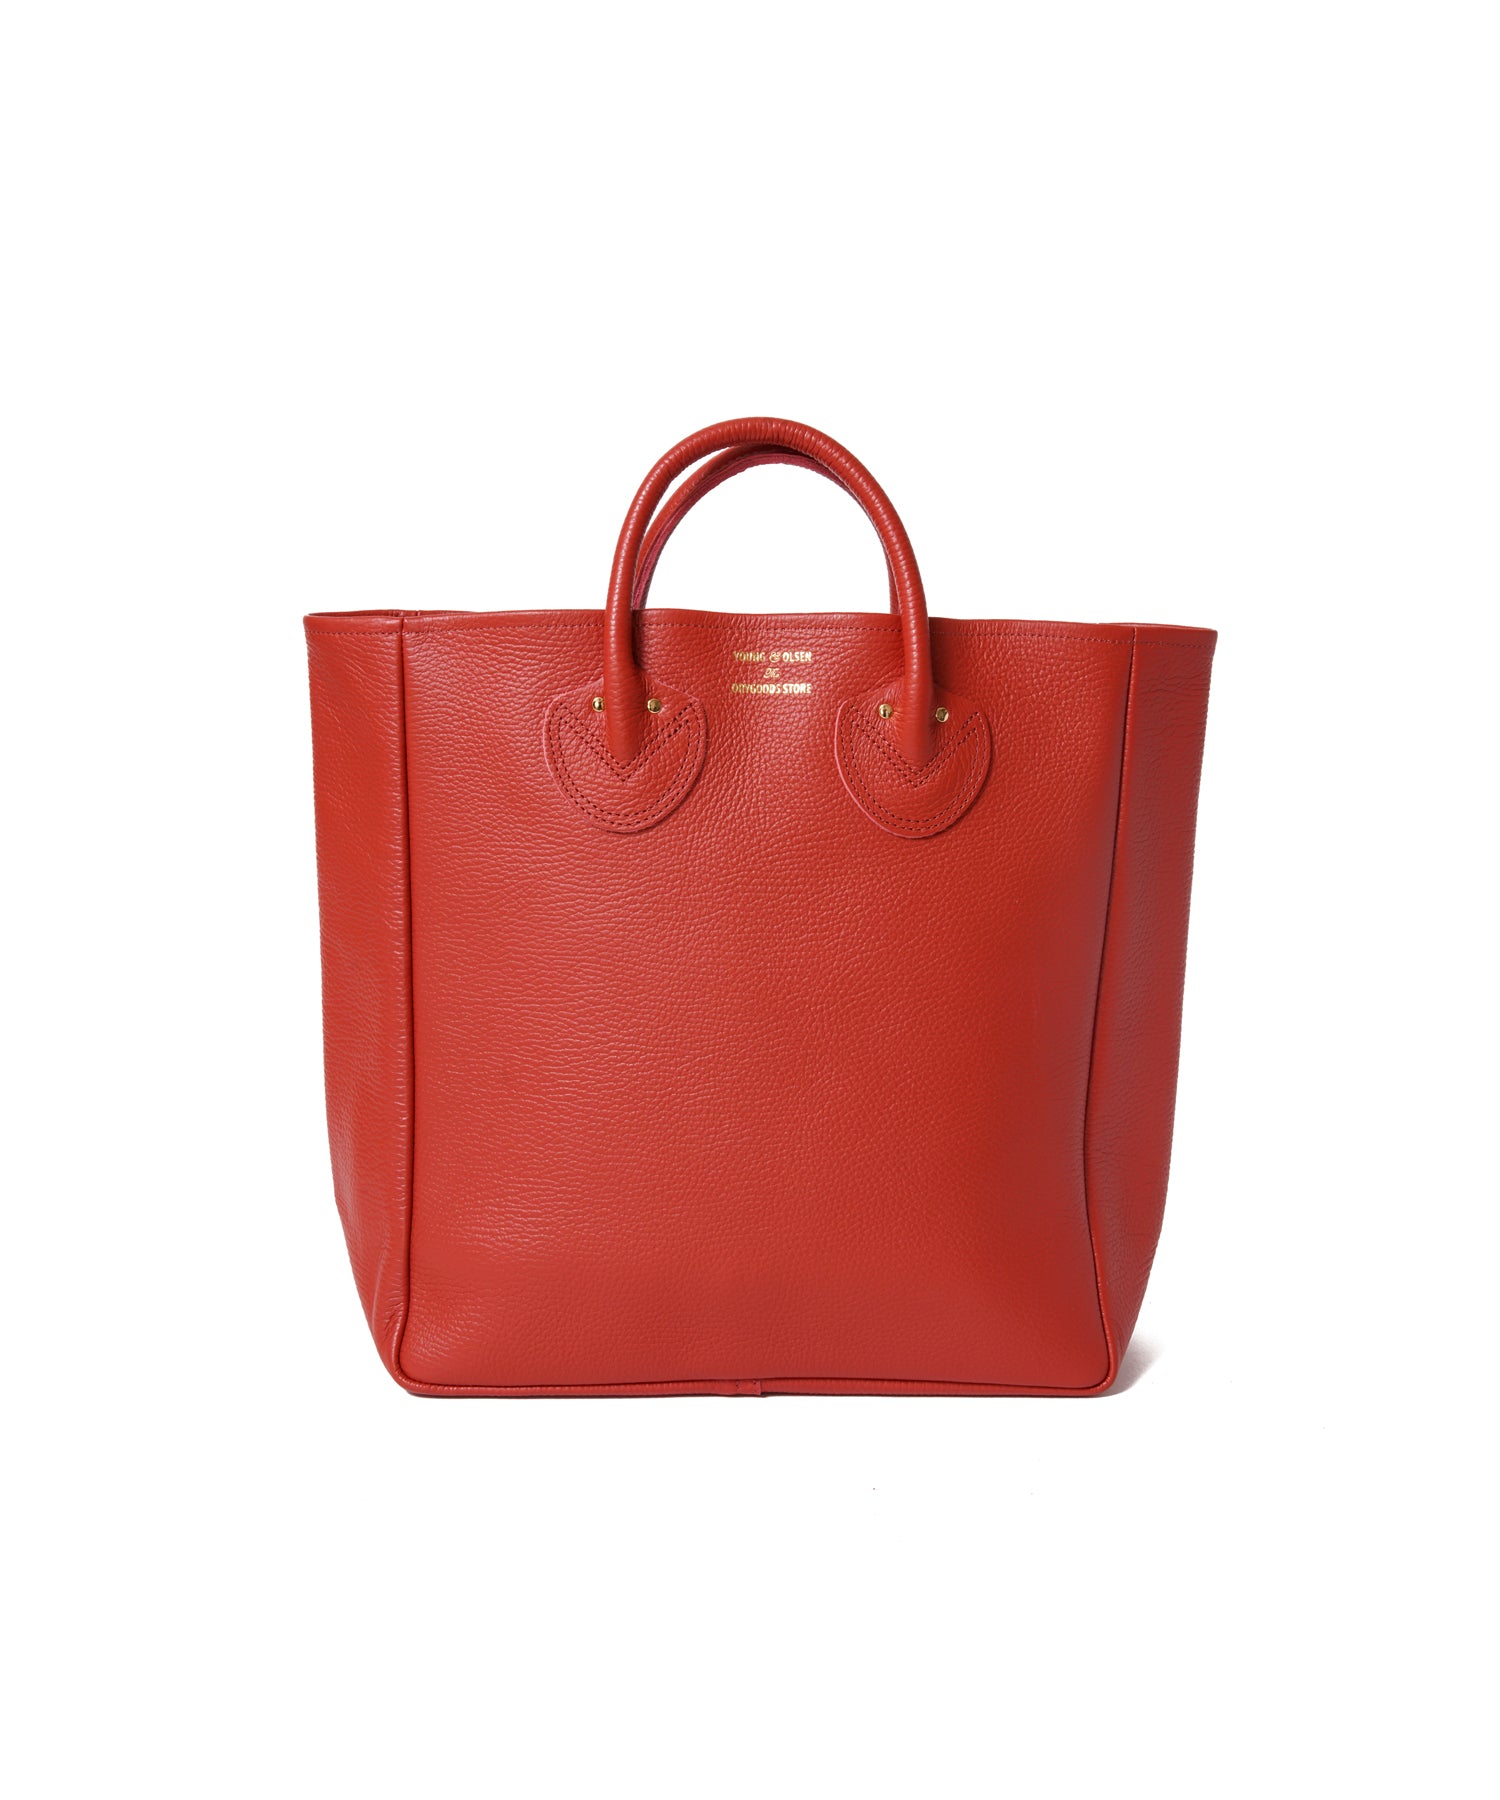 YOUNG \u0026 OLSEN   LEATHER TOTE Mトートバッグ種類トートバッグ